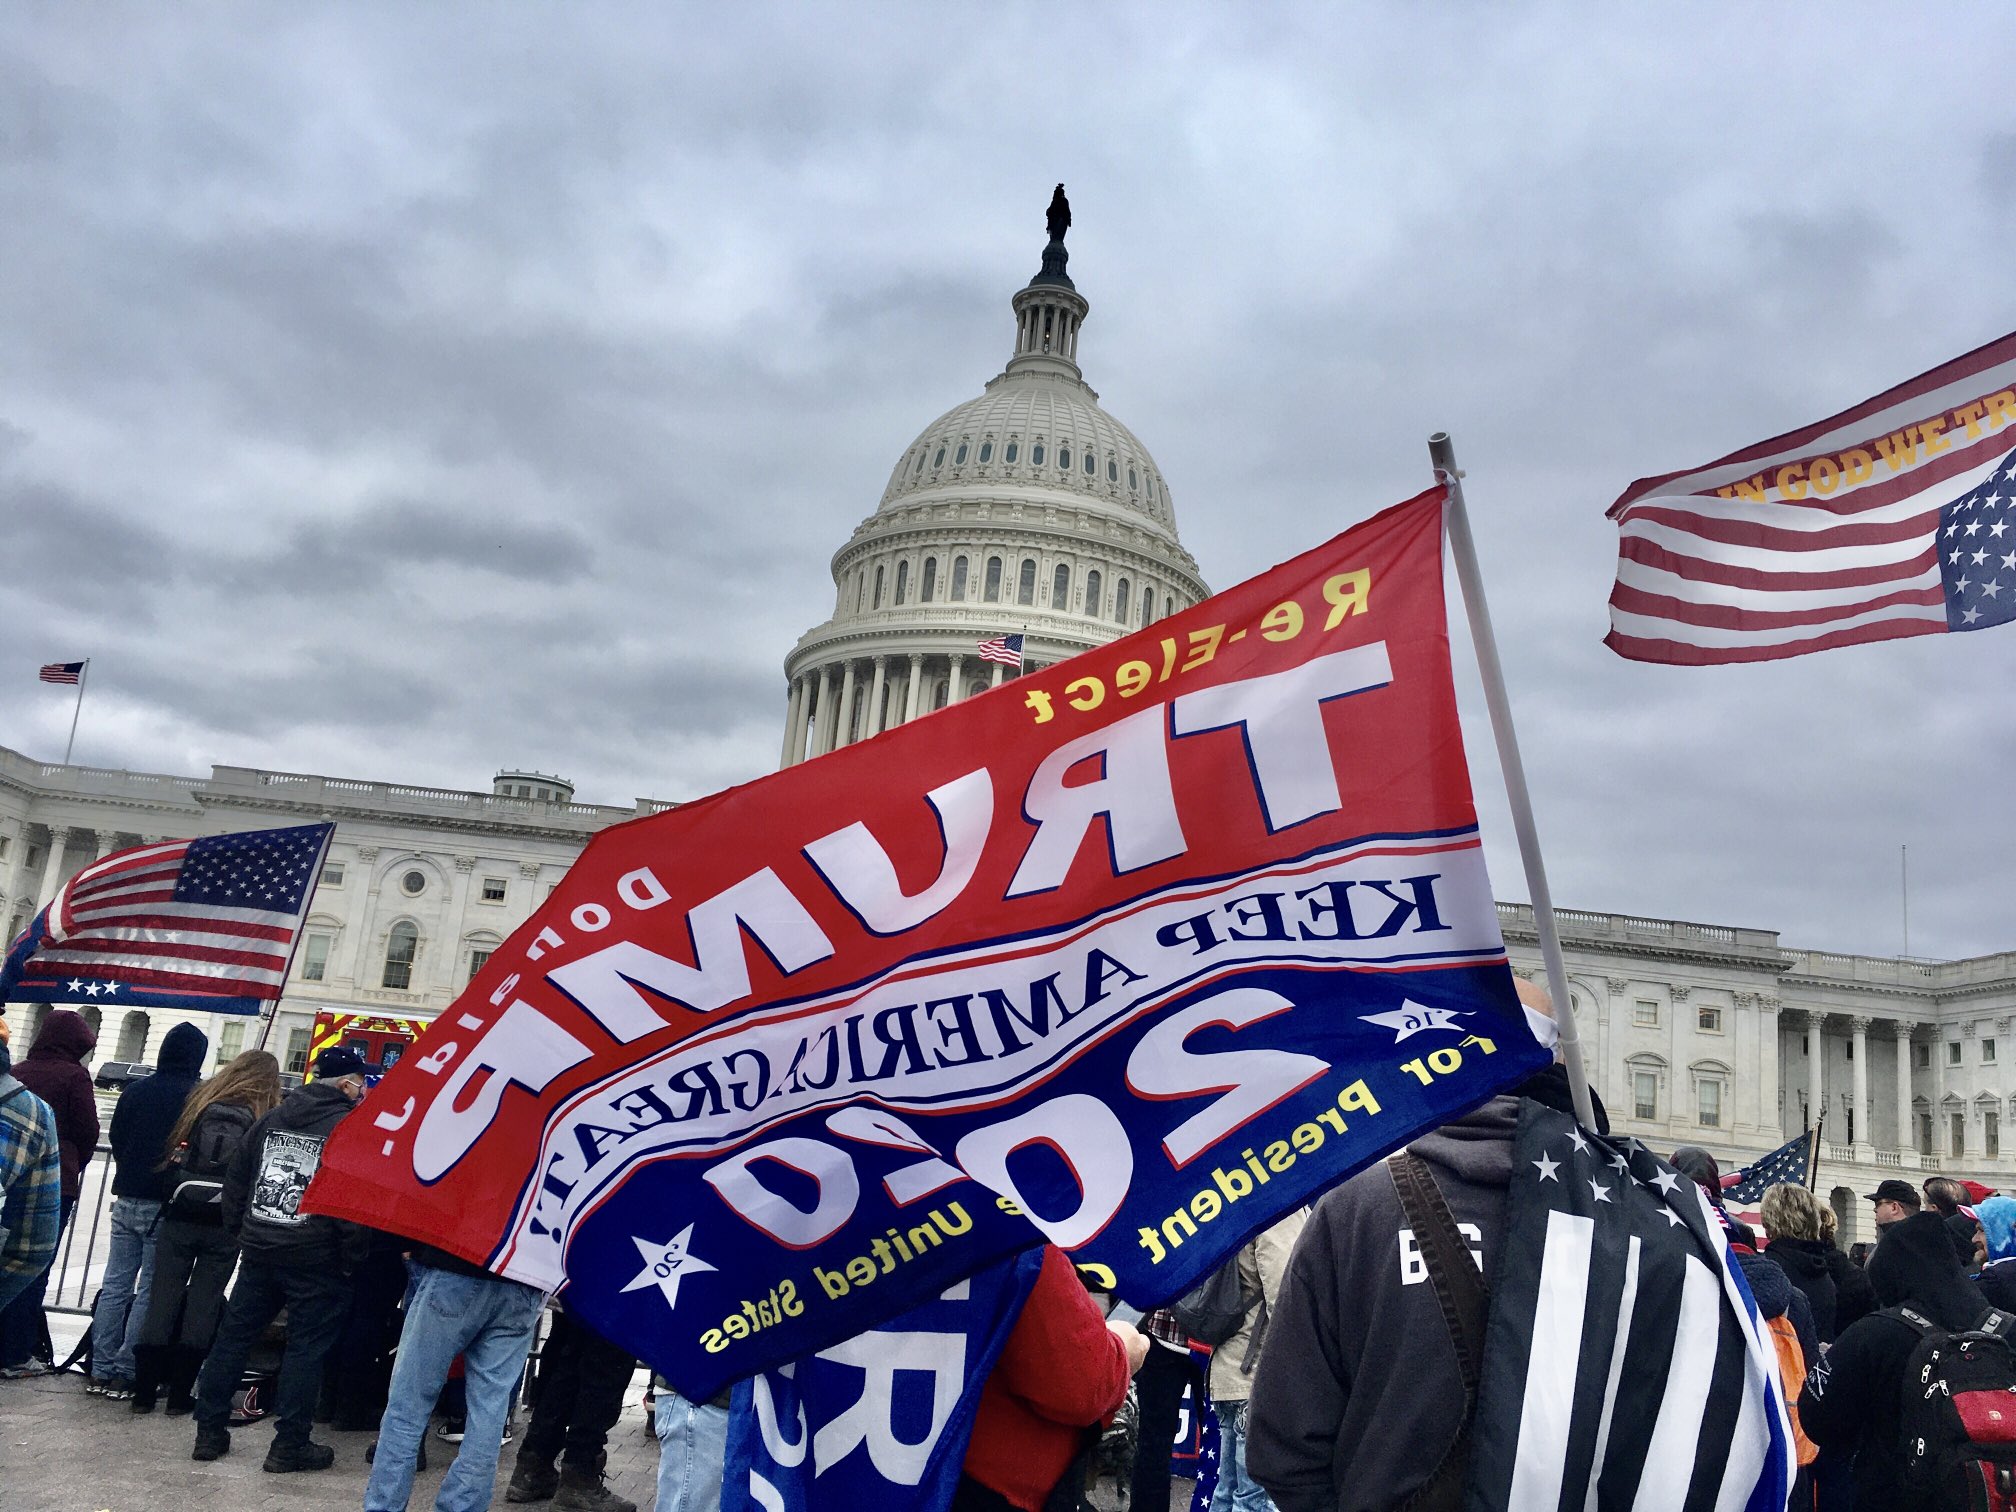 A large Trump flag waves in front of the U.S. Capitol